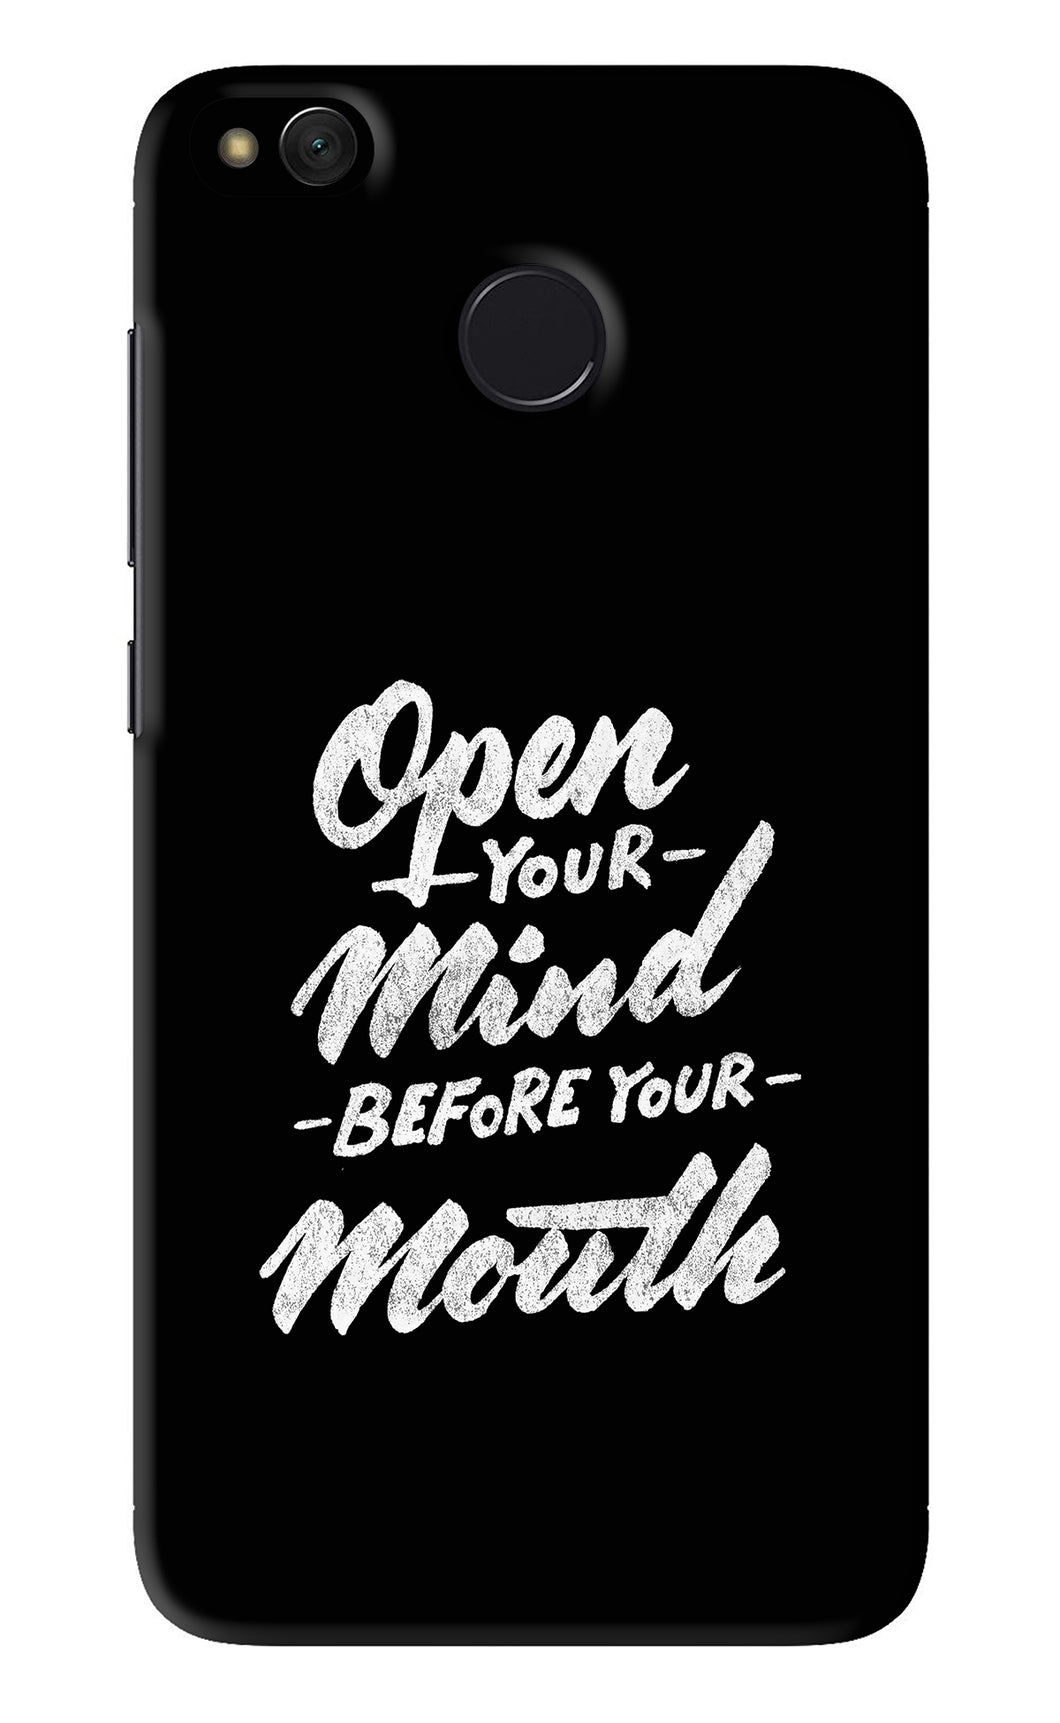 Open Your Mind Before Your Mouth Xiaomi Redmi 4 Back Skin Wrap